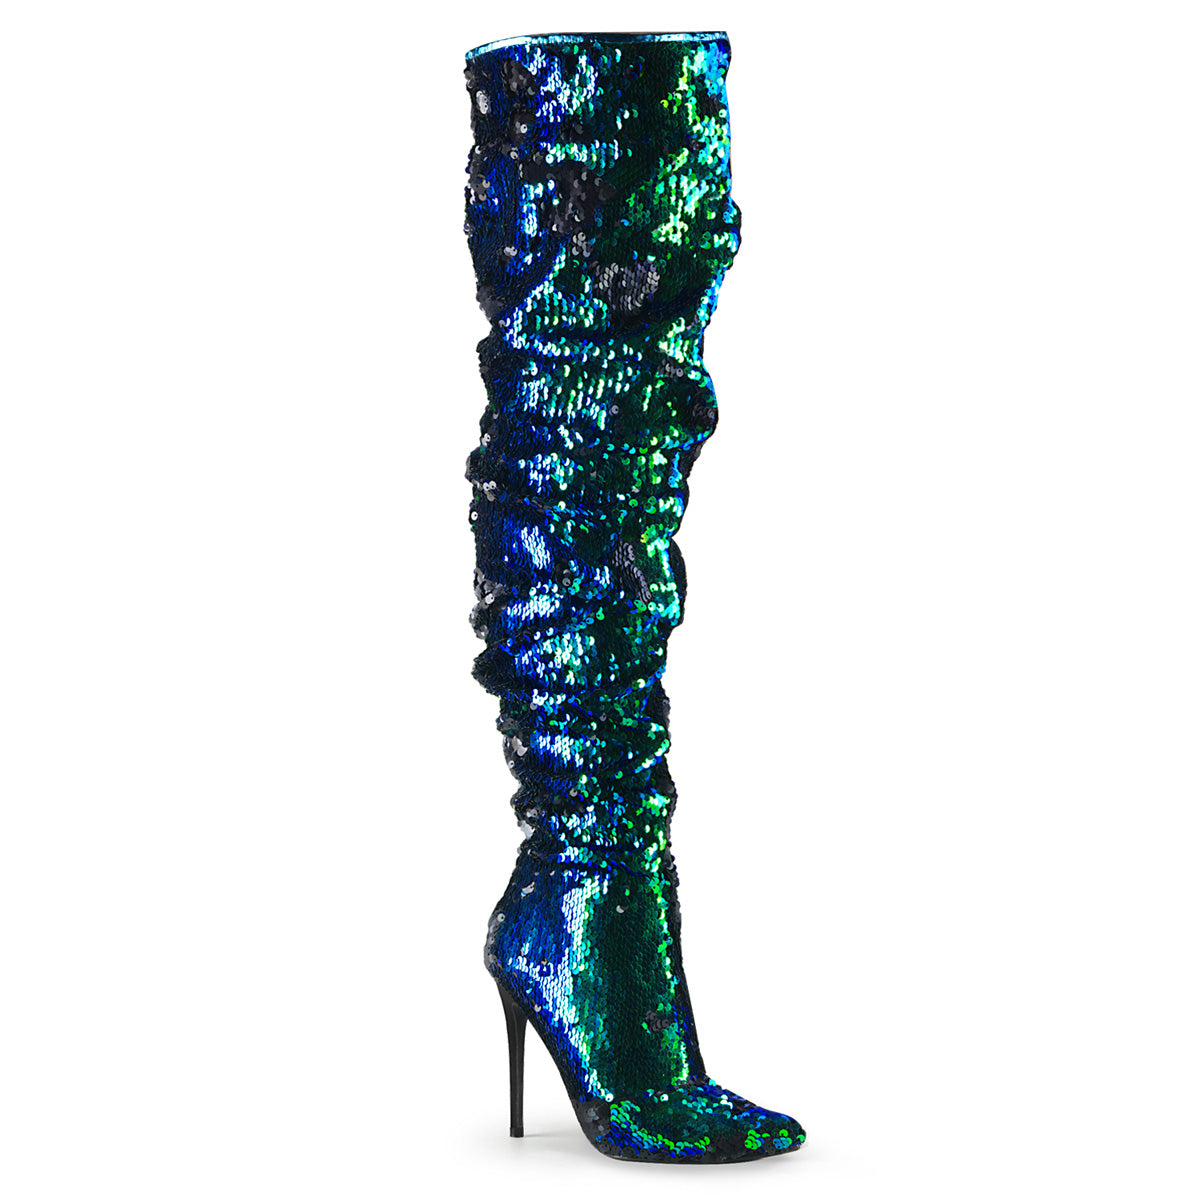 COURTLY-3011 5" Heel Green Iridescent Sequins Fetish Shoes